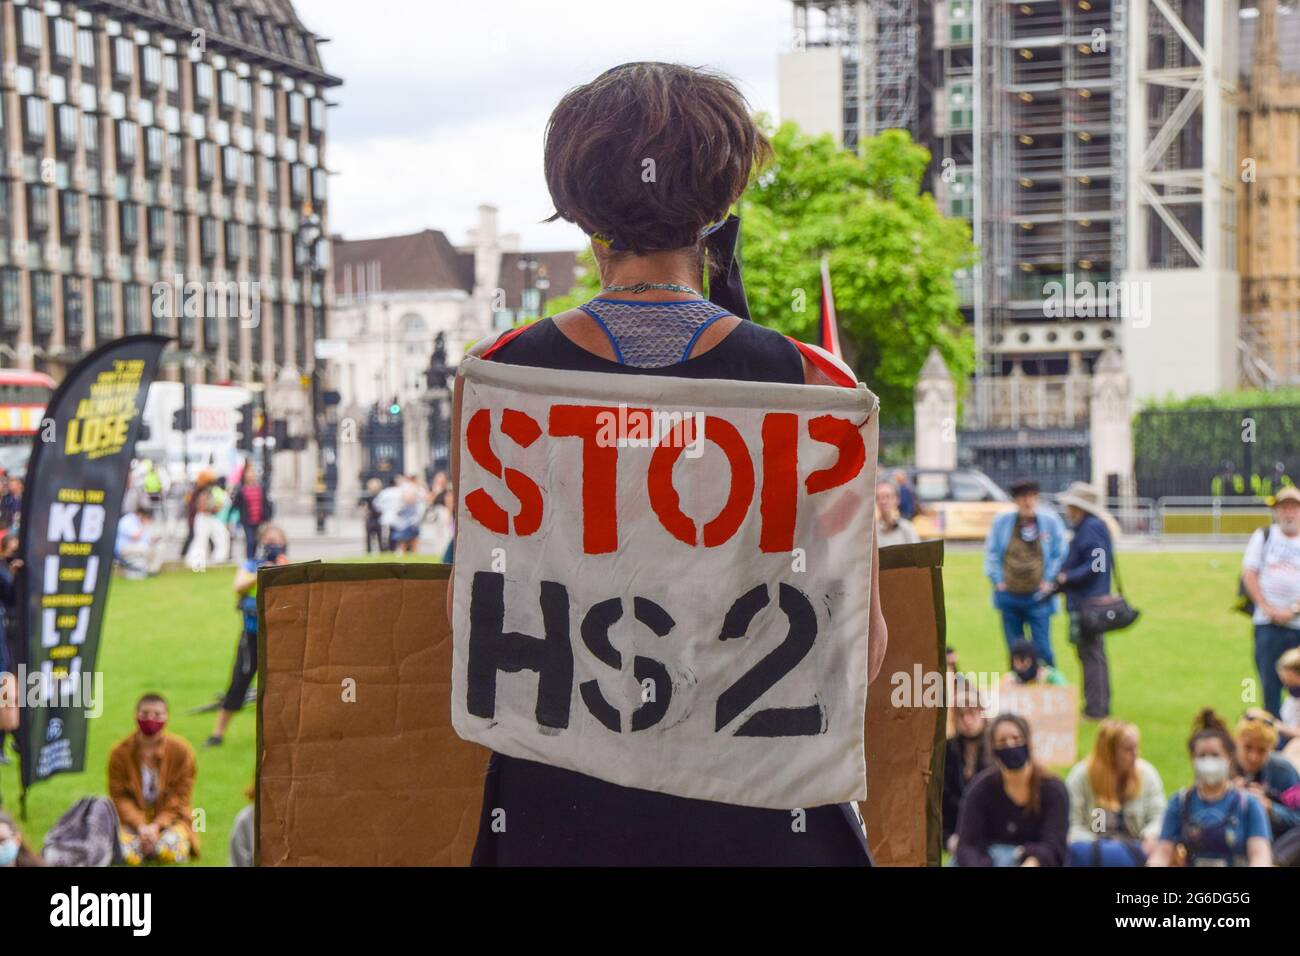 London, United Kingdom. 5th July 2021. A protester carries a 'Stop HS2' banner at the Kill The Bill protest. Demonstrators gathered in Parliament Square in protest against the Police, Crime, Sentencing and Courts Bill, which many say would give police more powers over protests in the UK. (Credit: Vuk Valcic / Alamy Live News) Stock Photo